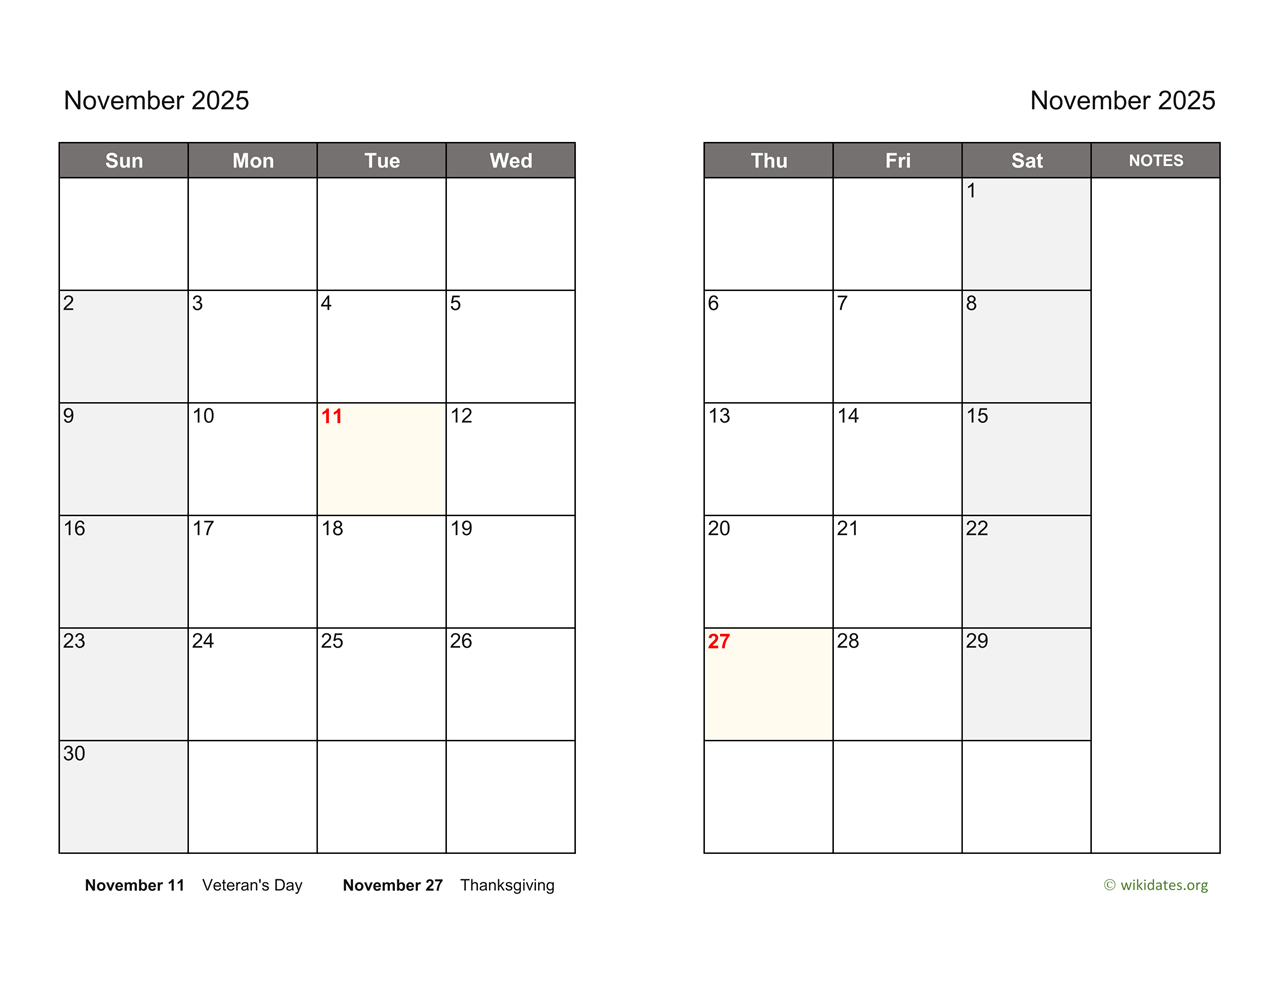 november-2025-calendar-on-two-pages-wikidates